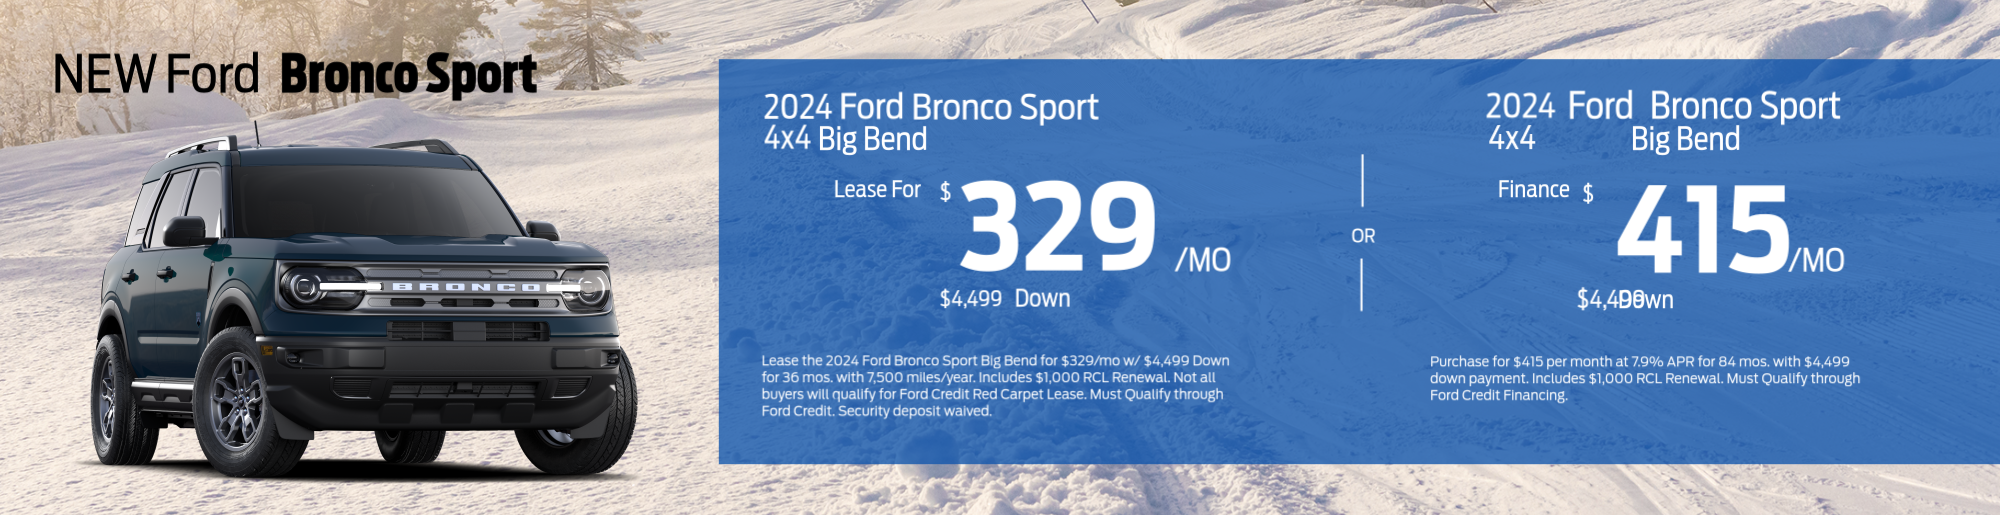 Ford Bronco Sport 4x4 Big Bend. Lease for $442 per month. $3499 due at signing. 2022 Ford Bronco Sport. Buy for $33,211.